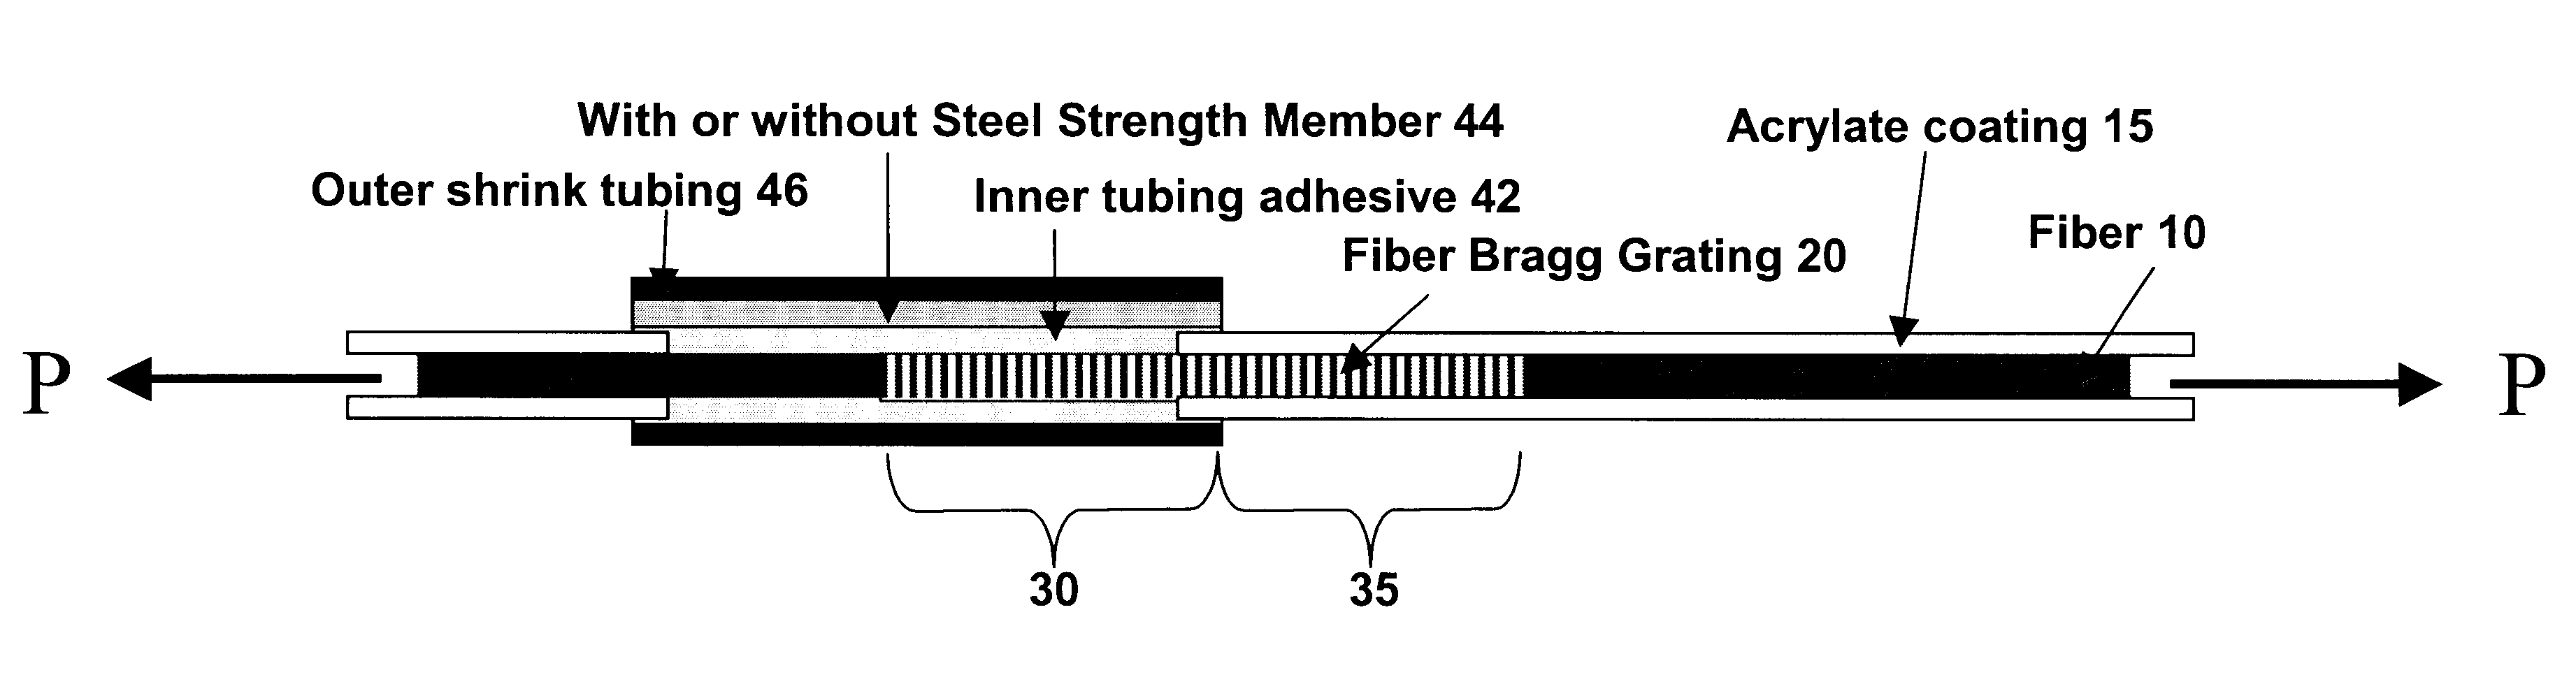 Apparatus for comparing tensile or compressive stresses imposed on different parts of optical fiber